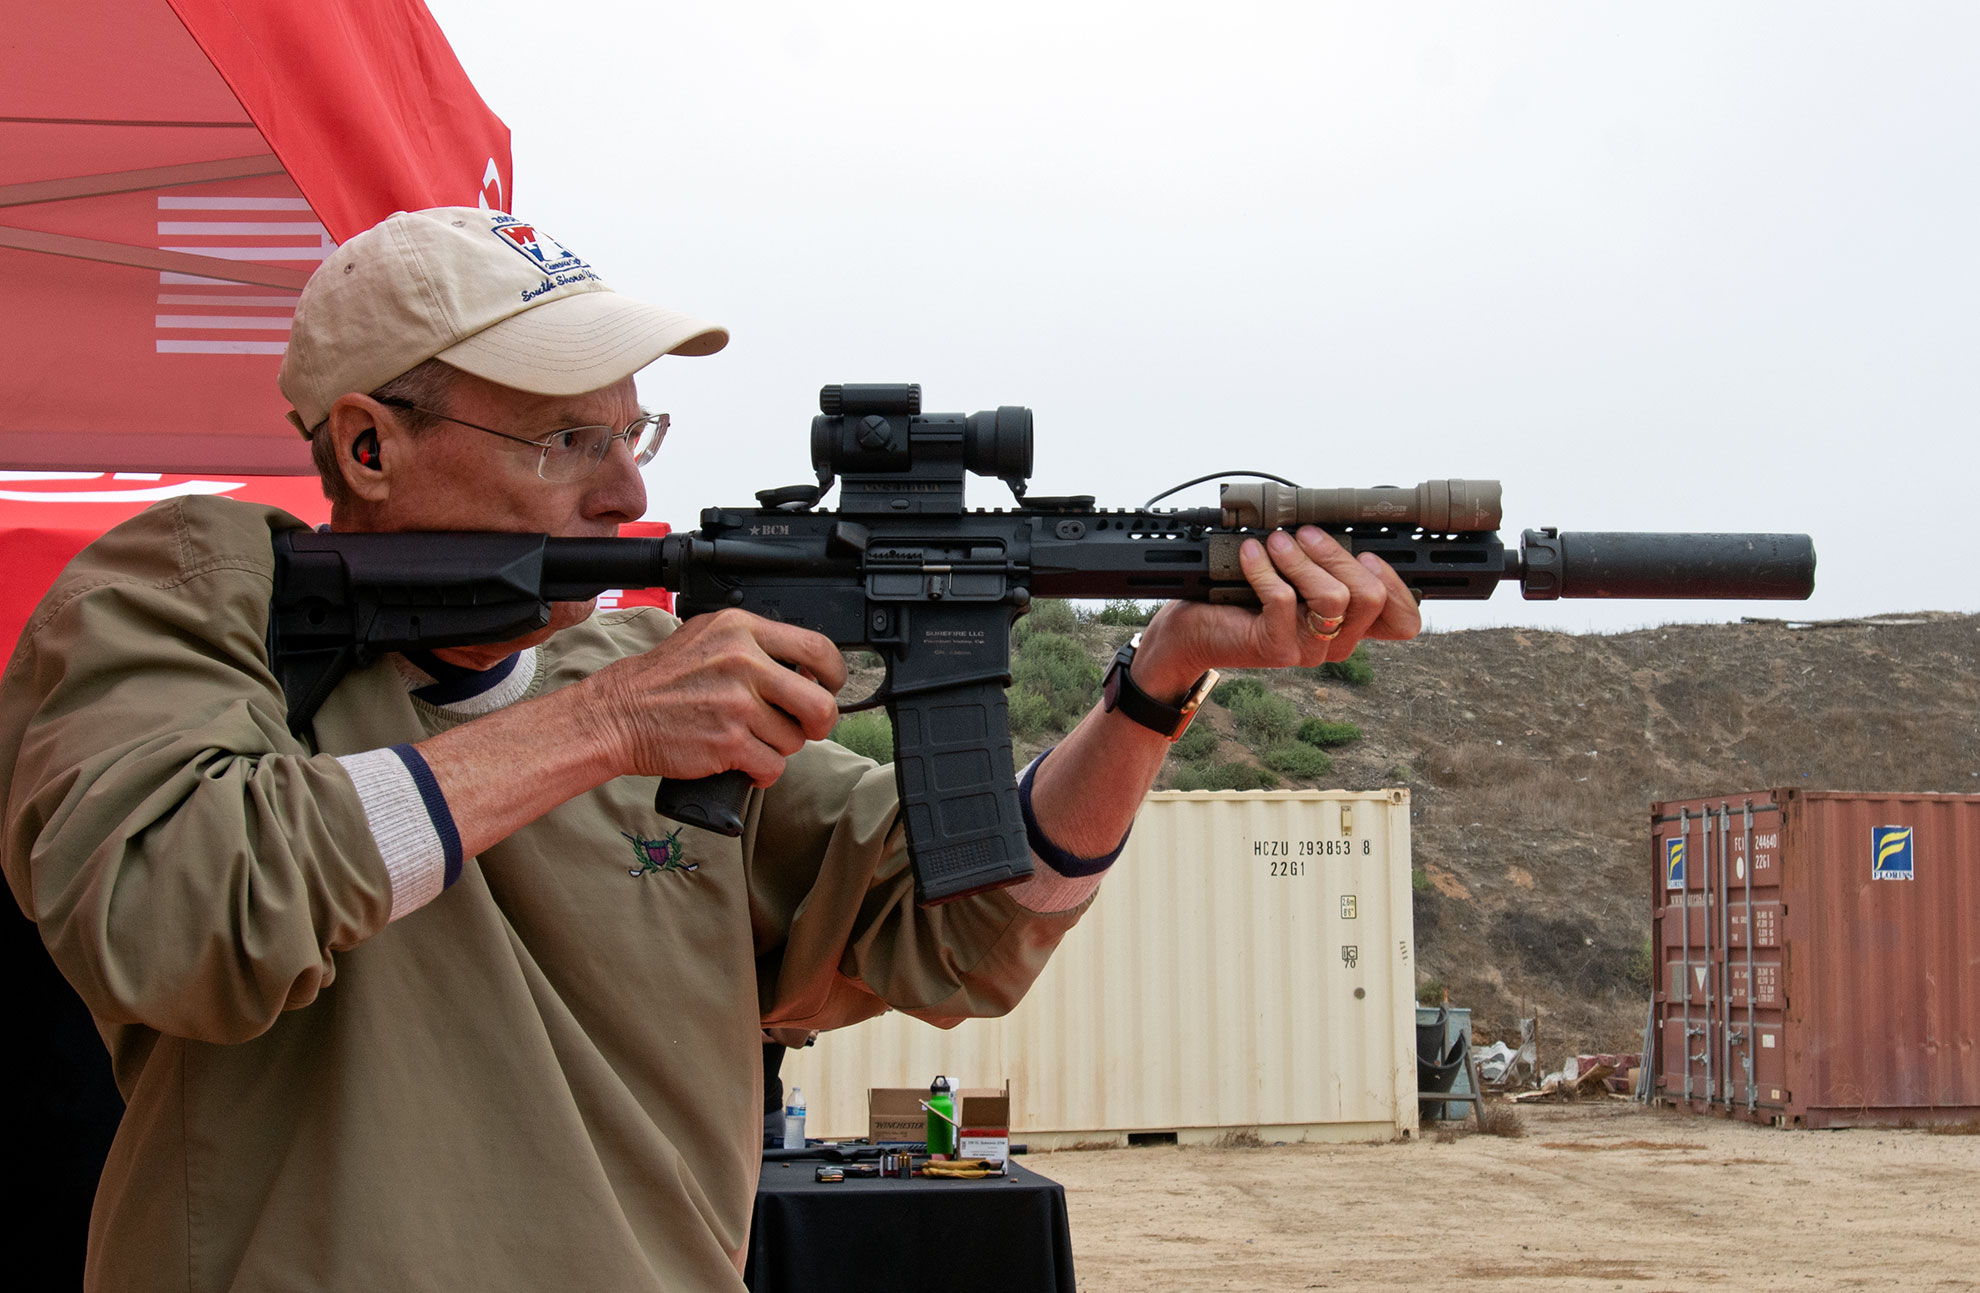 SureFire Hosts 2022 Employee Range DaySuppressor Division hosts private, employees-only event